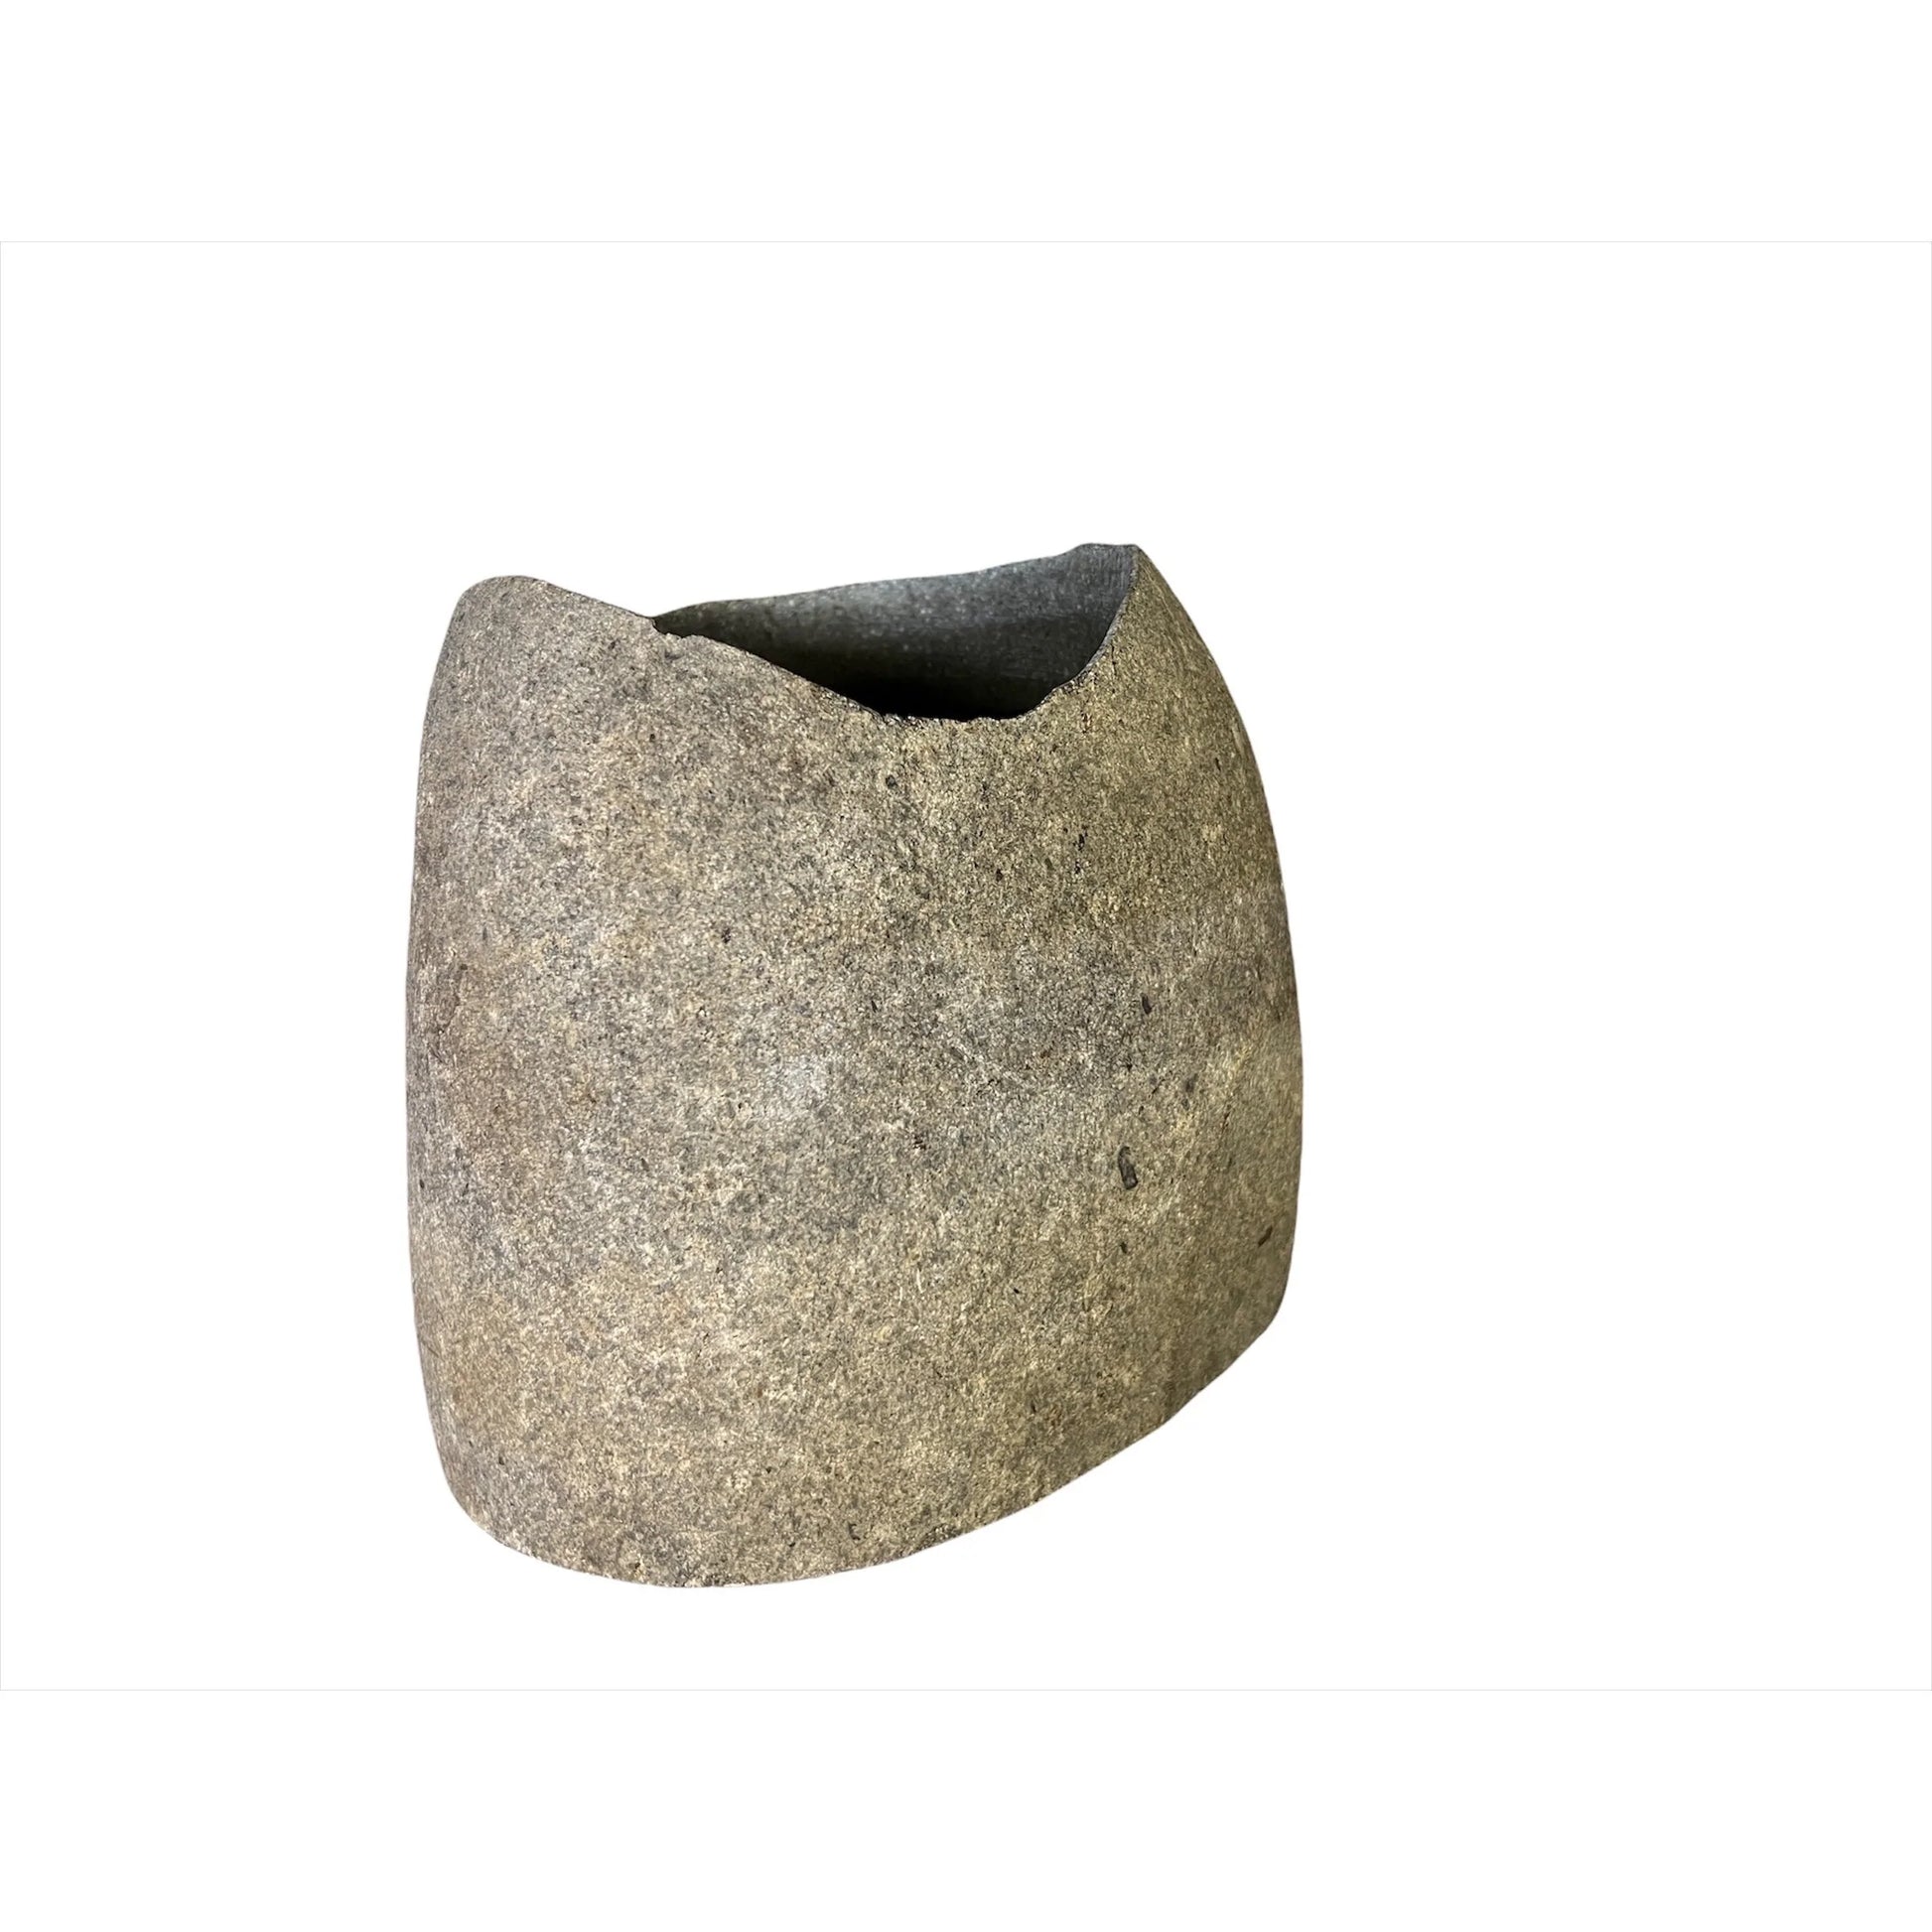 Image of Terra Cruda's Shadow Rock Vase from the Australian homewares collection